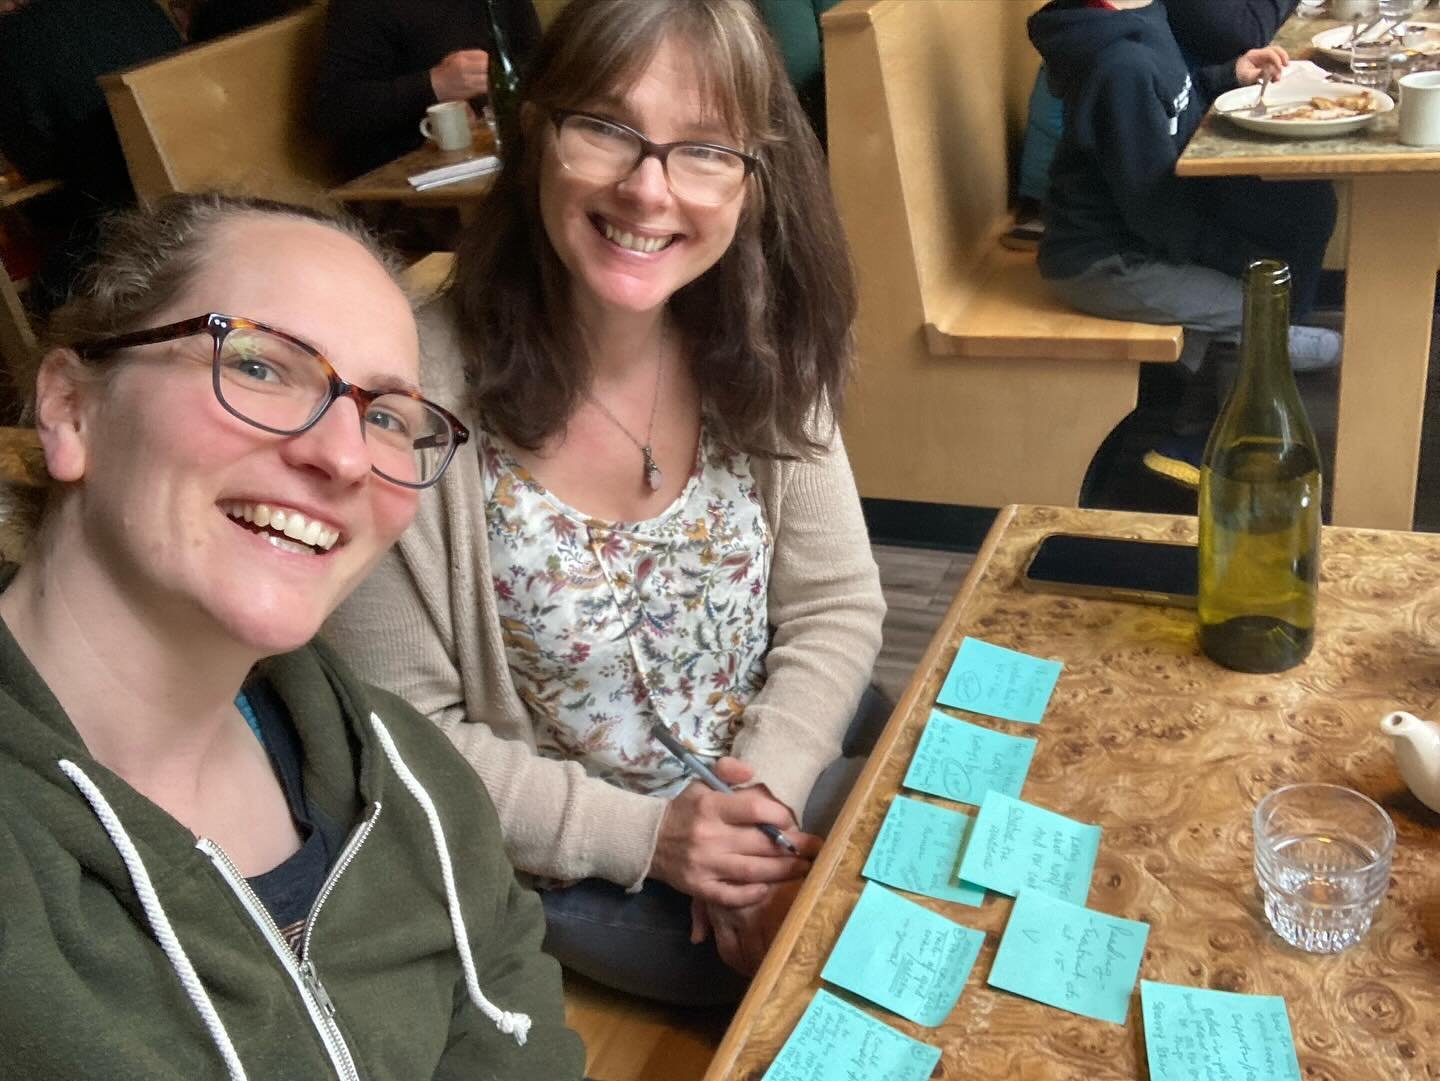 Ever wonder what it&rsquo;s like to plan a book launch? It&rsquo;s FUN! @anneliese_kamola_author and I ate a fantastic brunch, figured out what themes we wanted to focus on, what readings I wanted to do, and generally got ourselves stoked for my US l